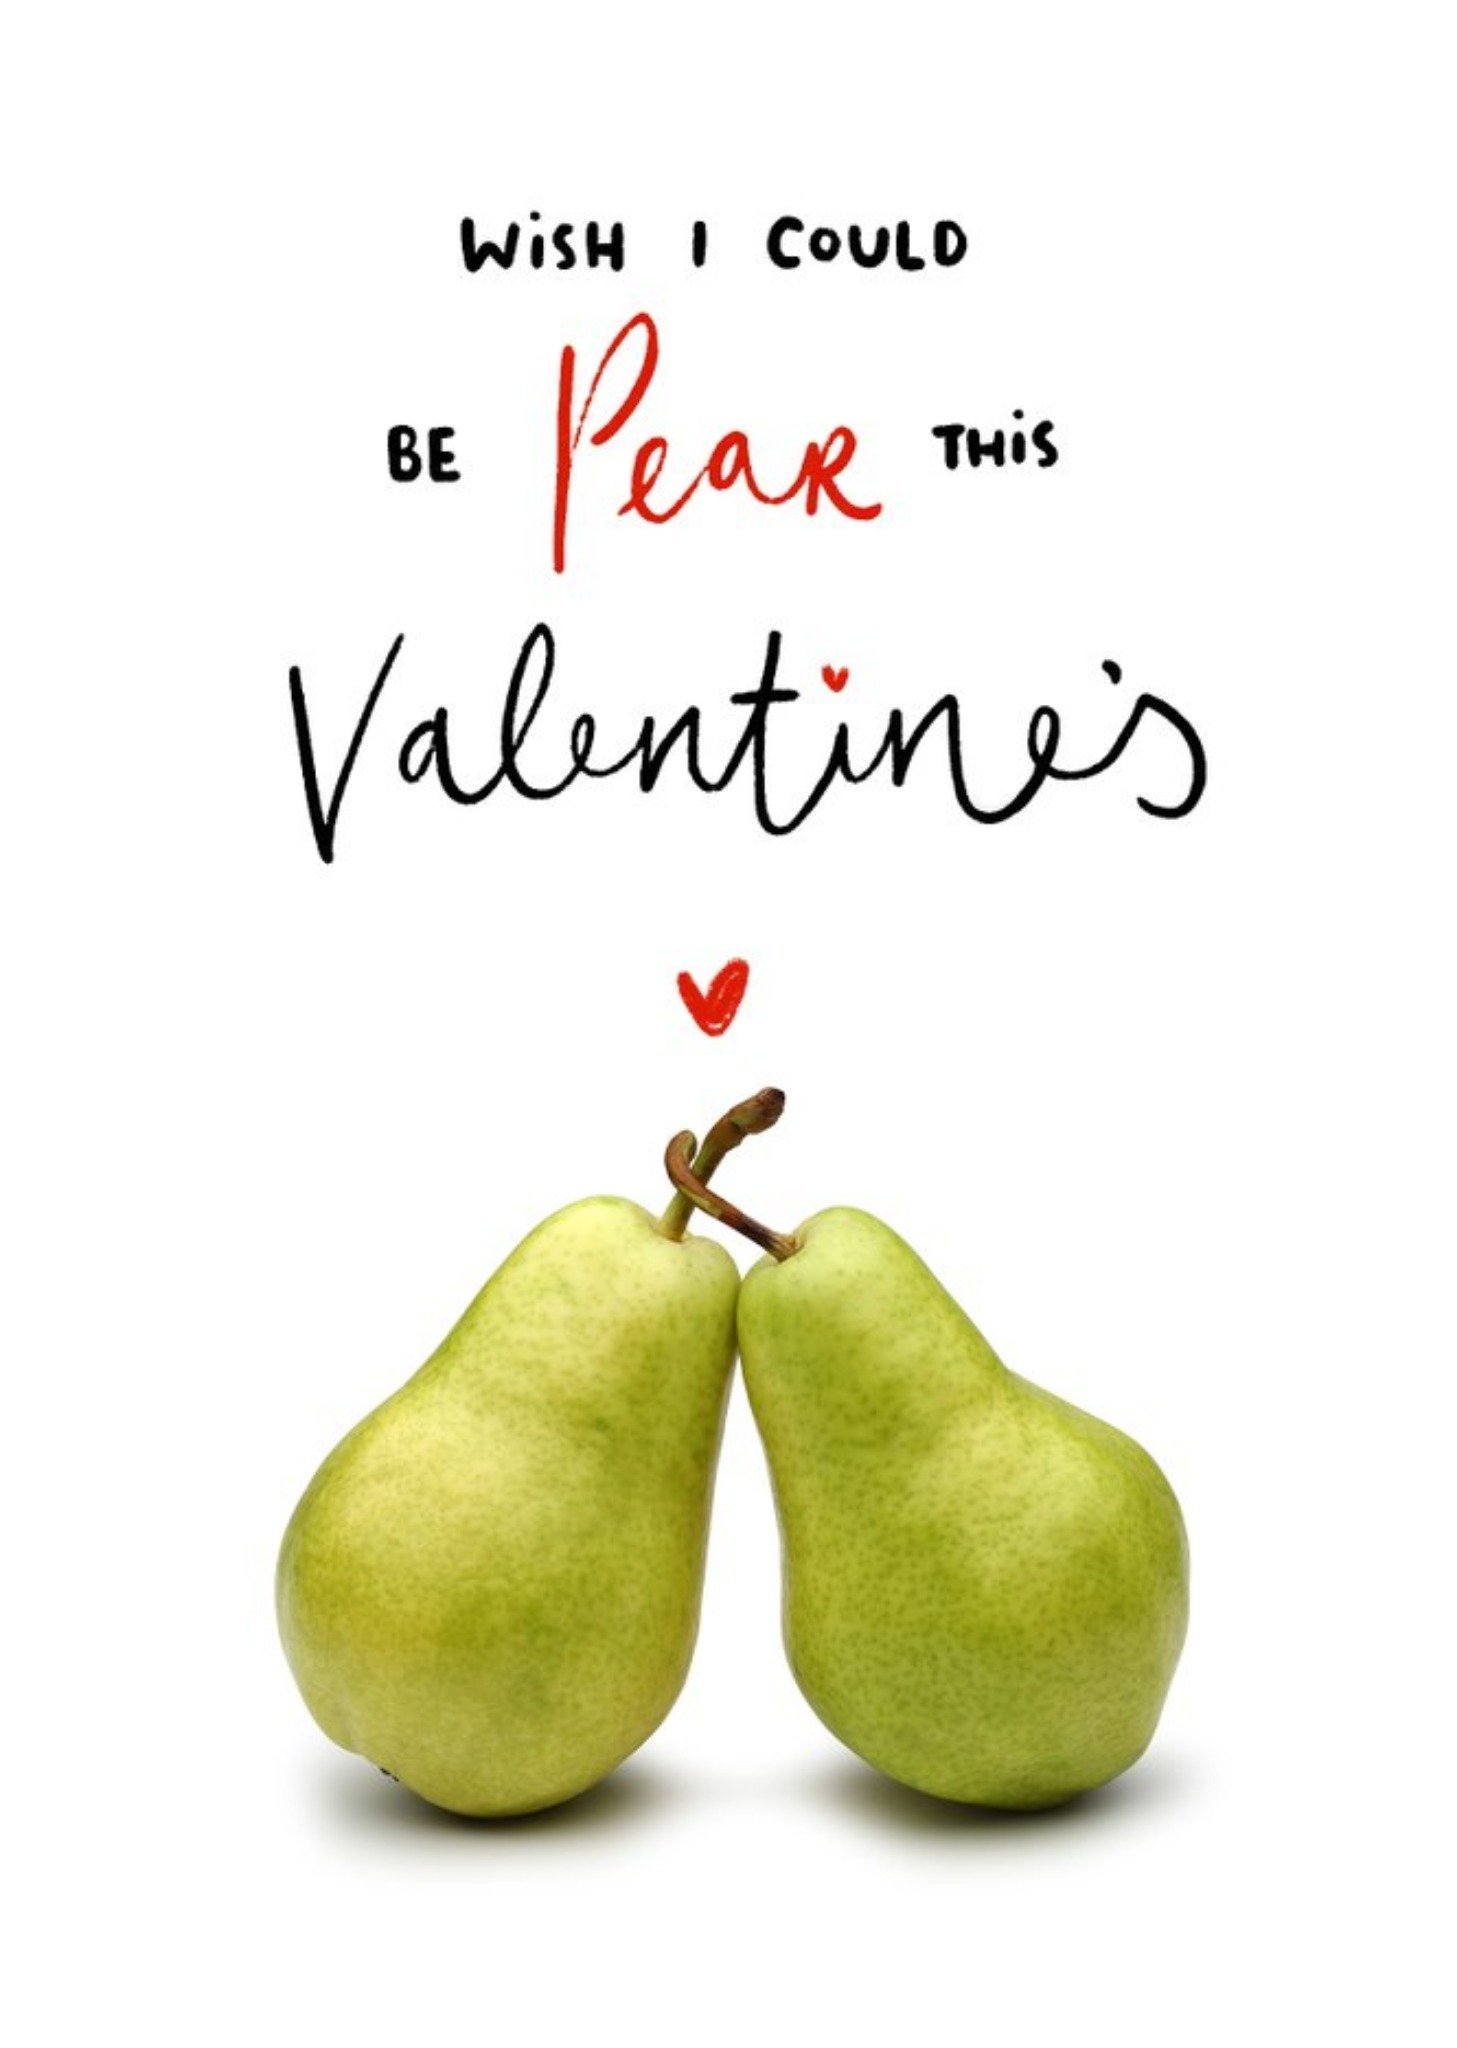 Moonpig Funny Pun Wish I Could Be Pear This Valentine's Card, Large